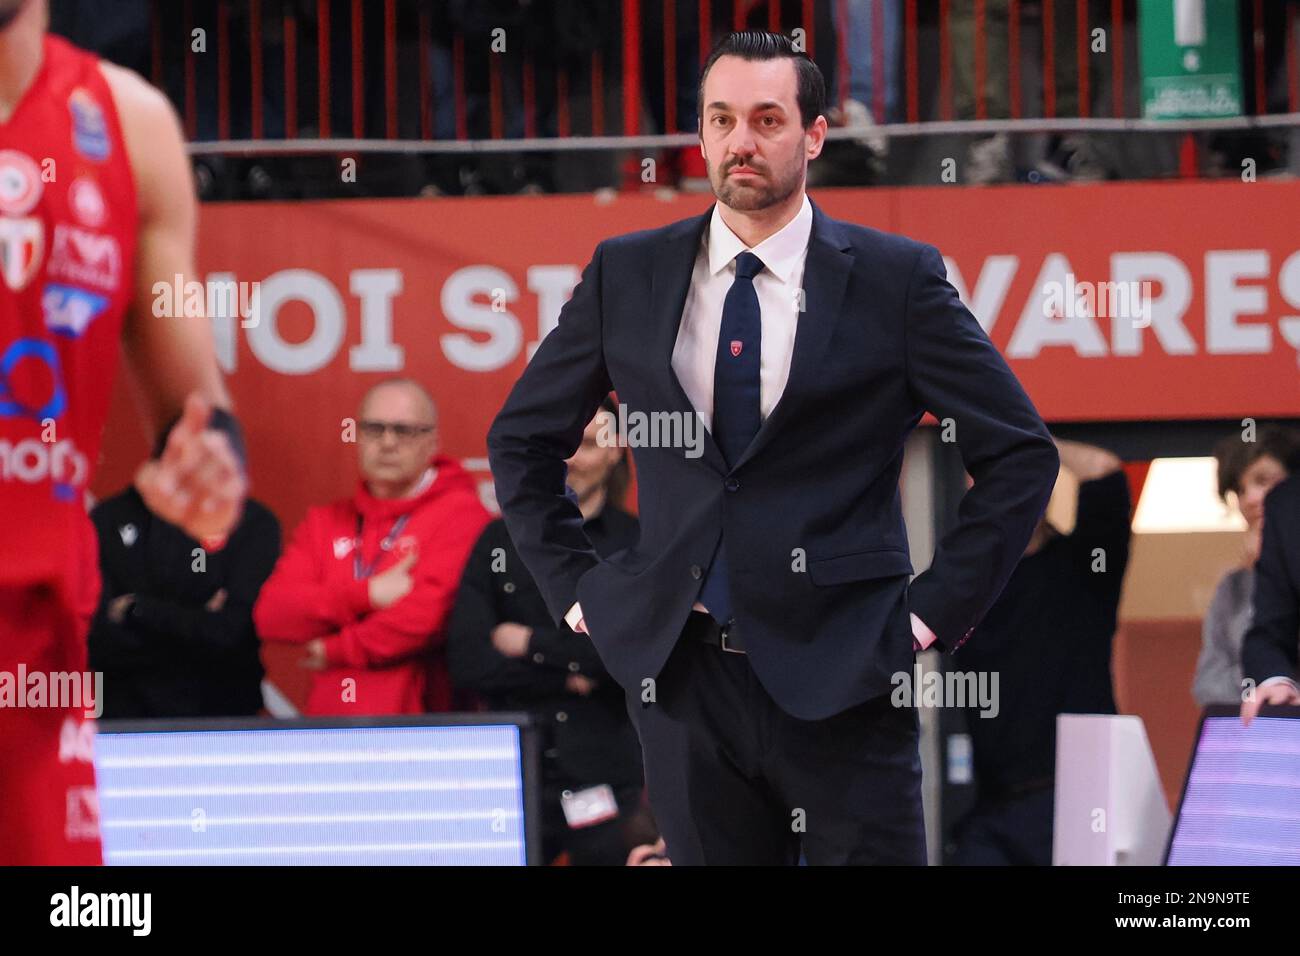 Varese, Italy. 12th Feb, 2023. Matt Brase, head coach Pallacanestro Openjobmetis Varese during Openjobmetis Varese vs EA7 Emporio Armani Milano, Italian Basketball A Serie Championship in Varese, Italy, February 12 2023 Credit: Independent Photo Agency/Alamy Live News Stock Photo